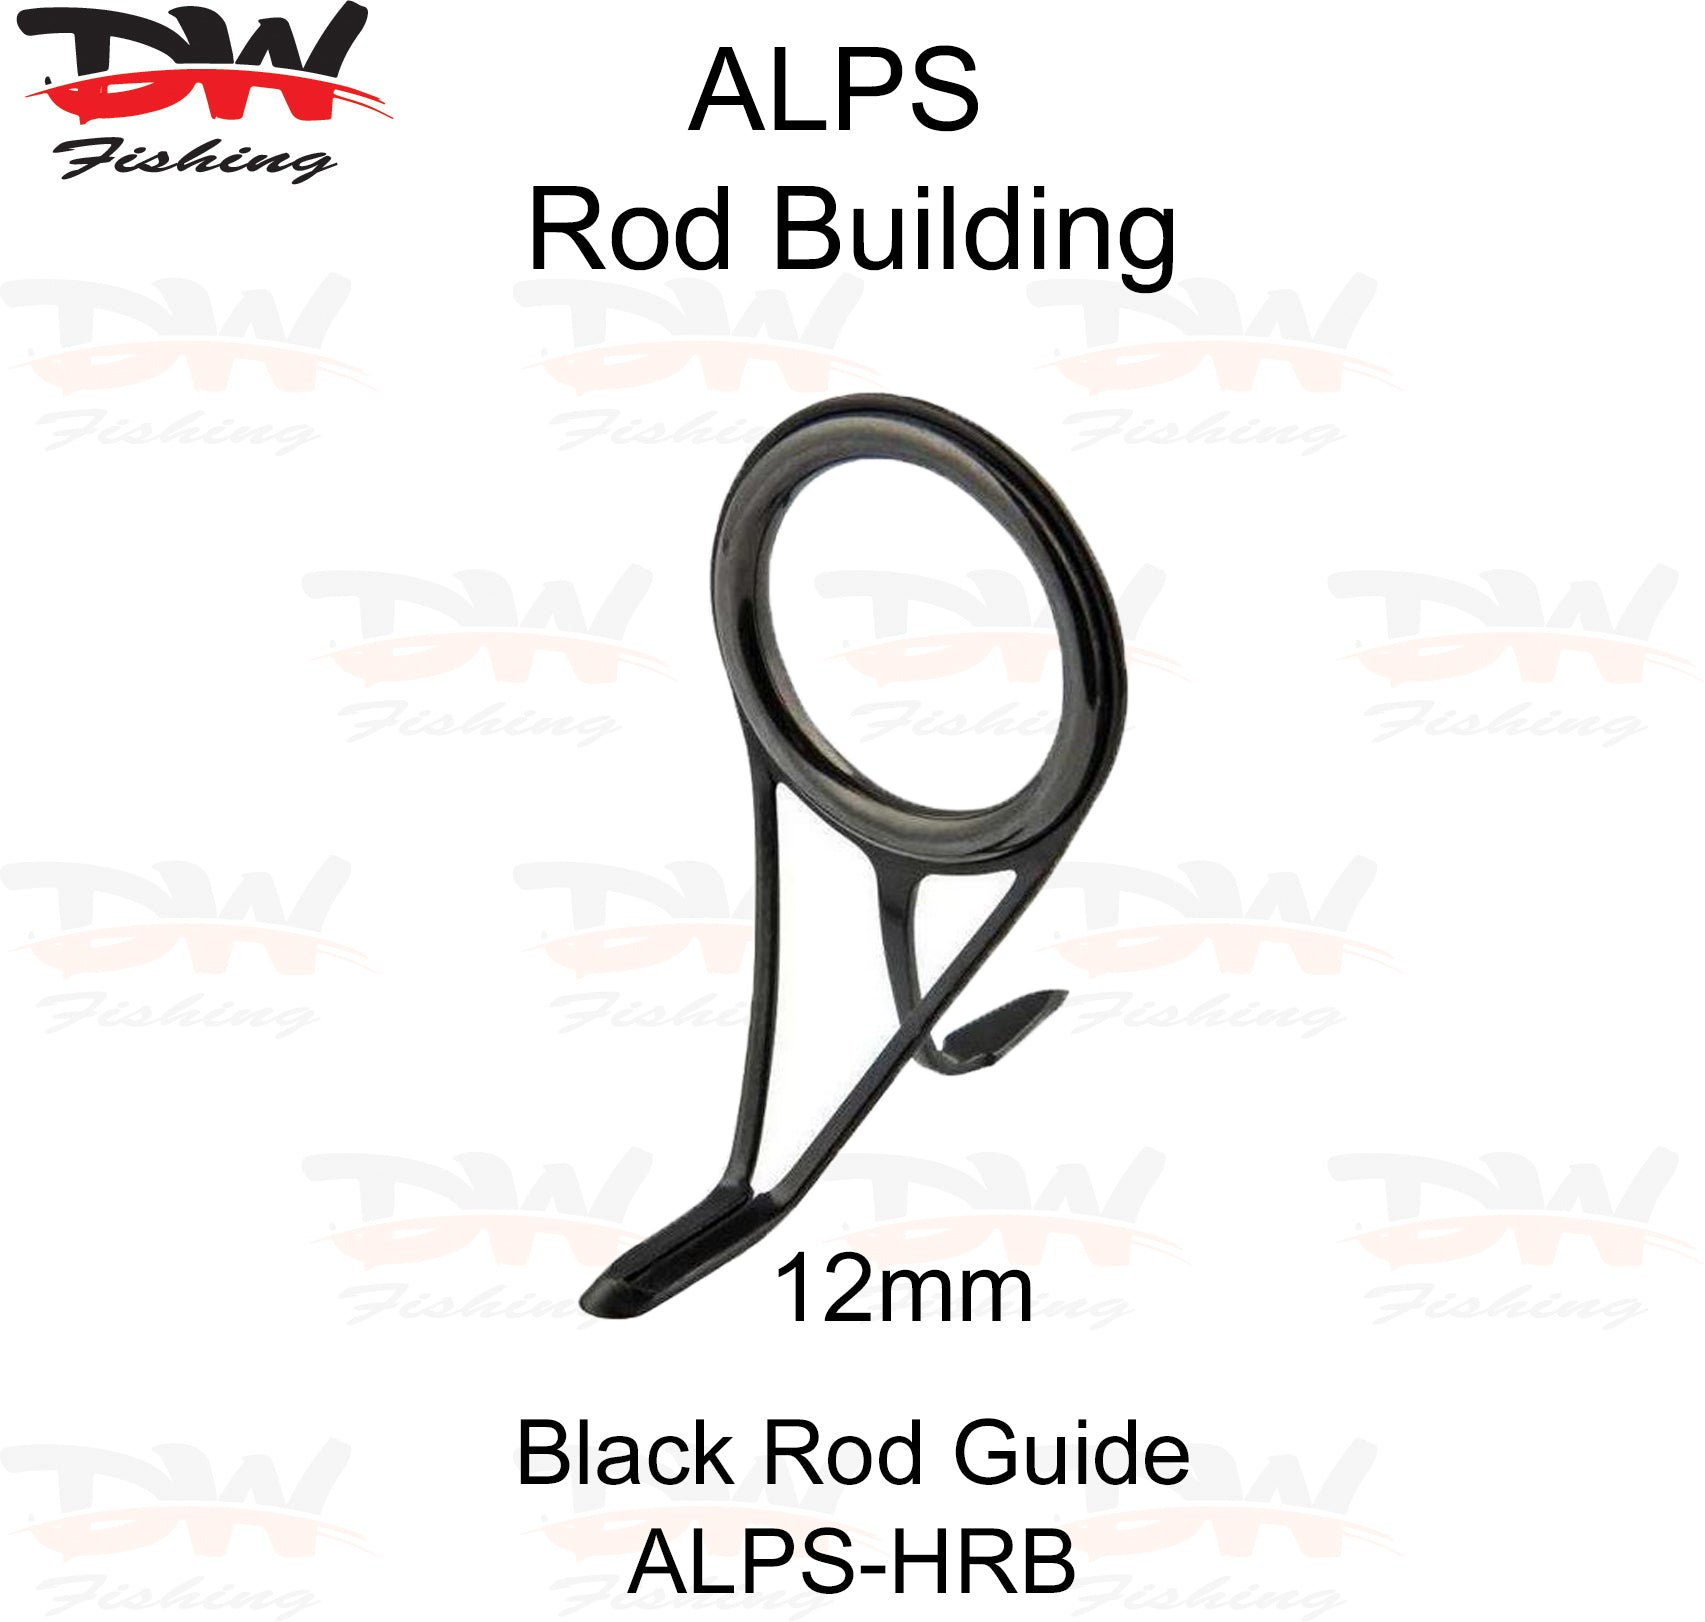 ALPS Rod Guide Stainless Steel, Rod Building